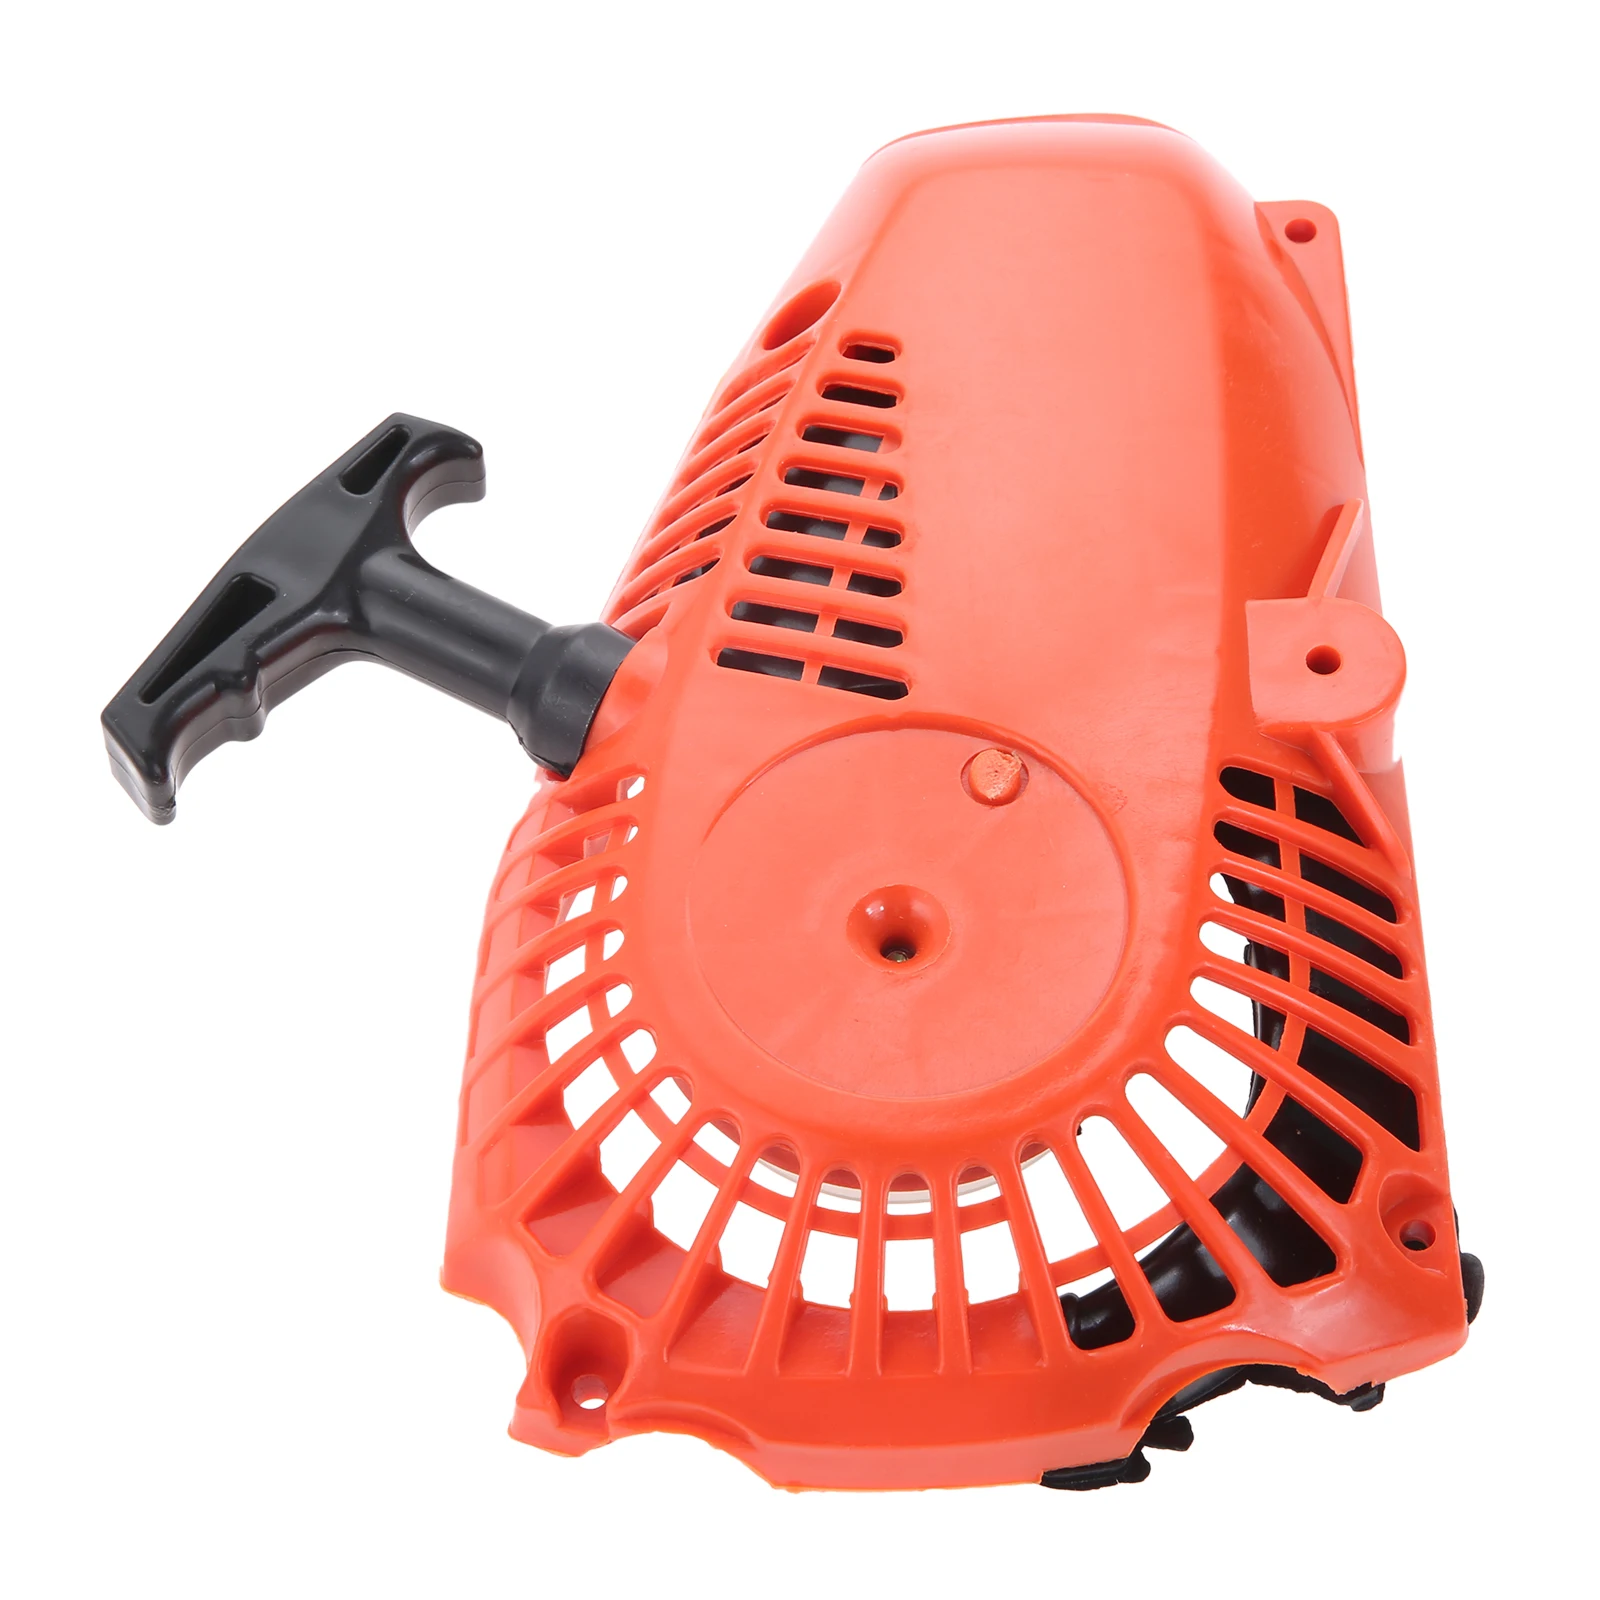 

Gasoline Chainsaw Pull Starter fit for 2500 25CC Chainsaw Brush Cutter Parts 2T Rope Reel 4T Usual Use Garden Replace Repair